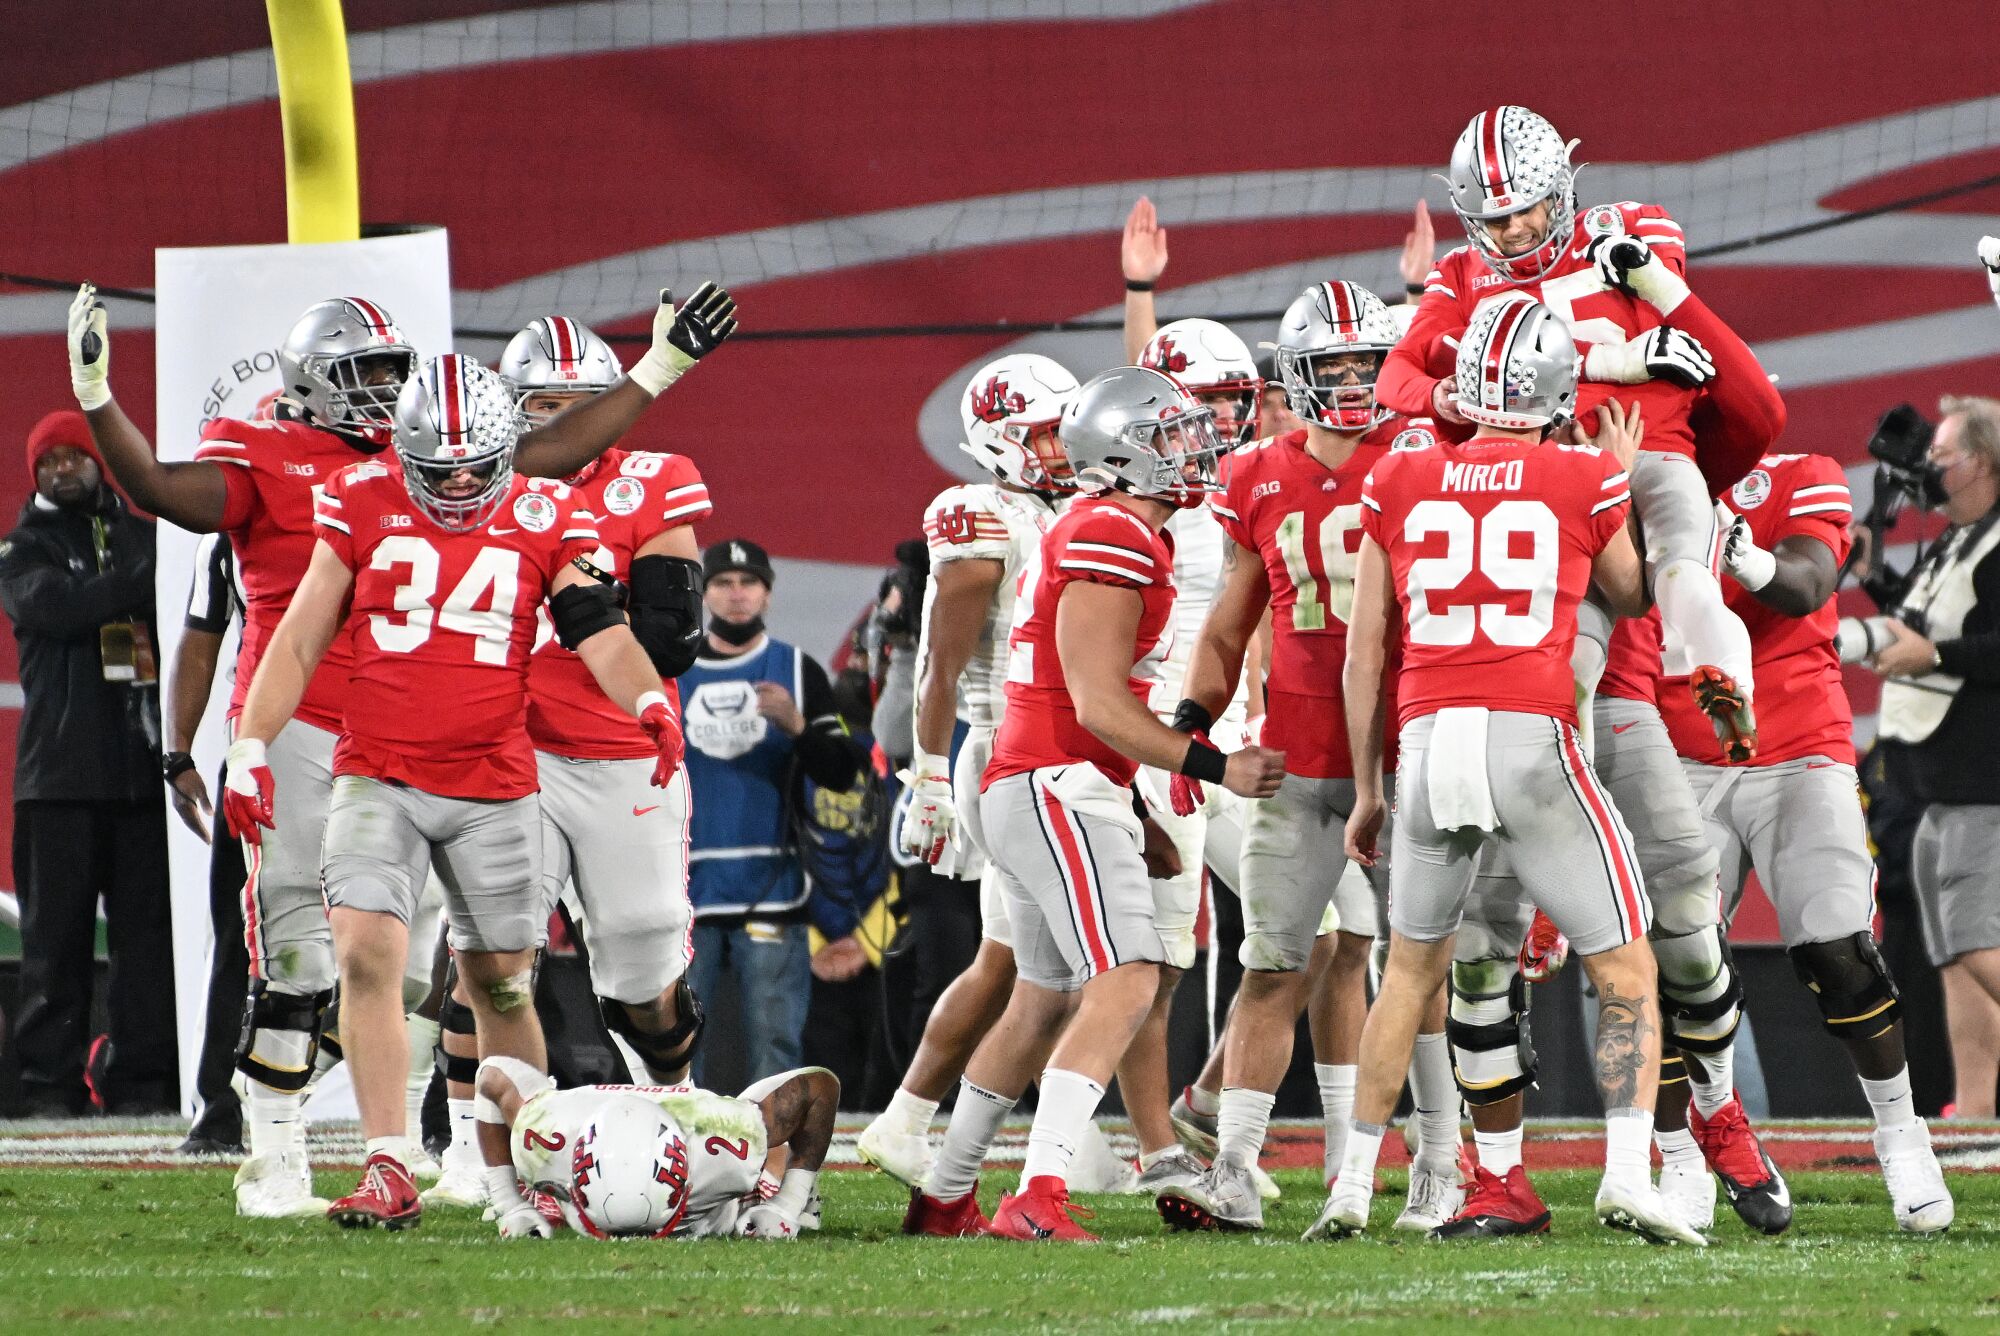 Ohio State kicker Noah Ruggles is lifted in the air after kicking the winning field goal against Utah.